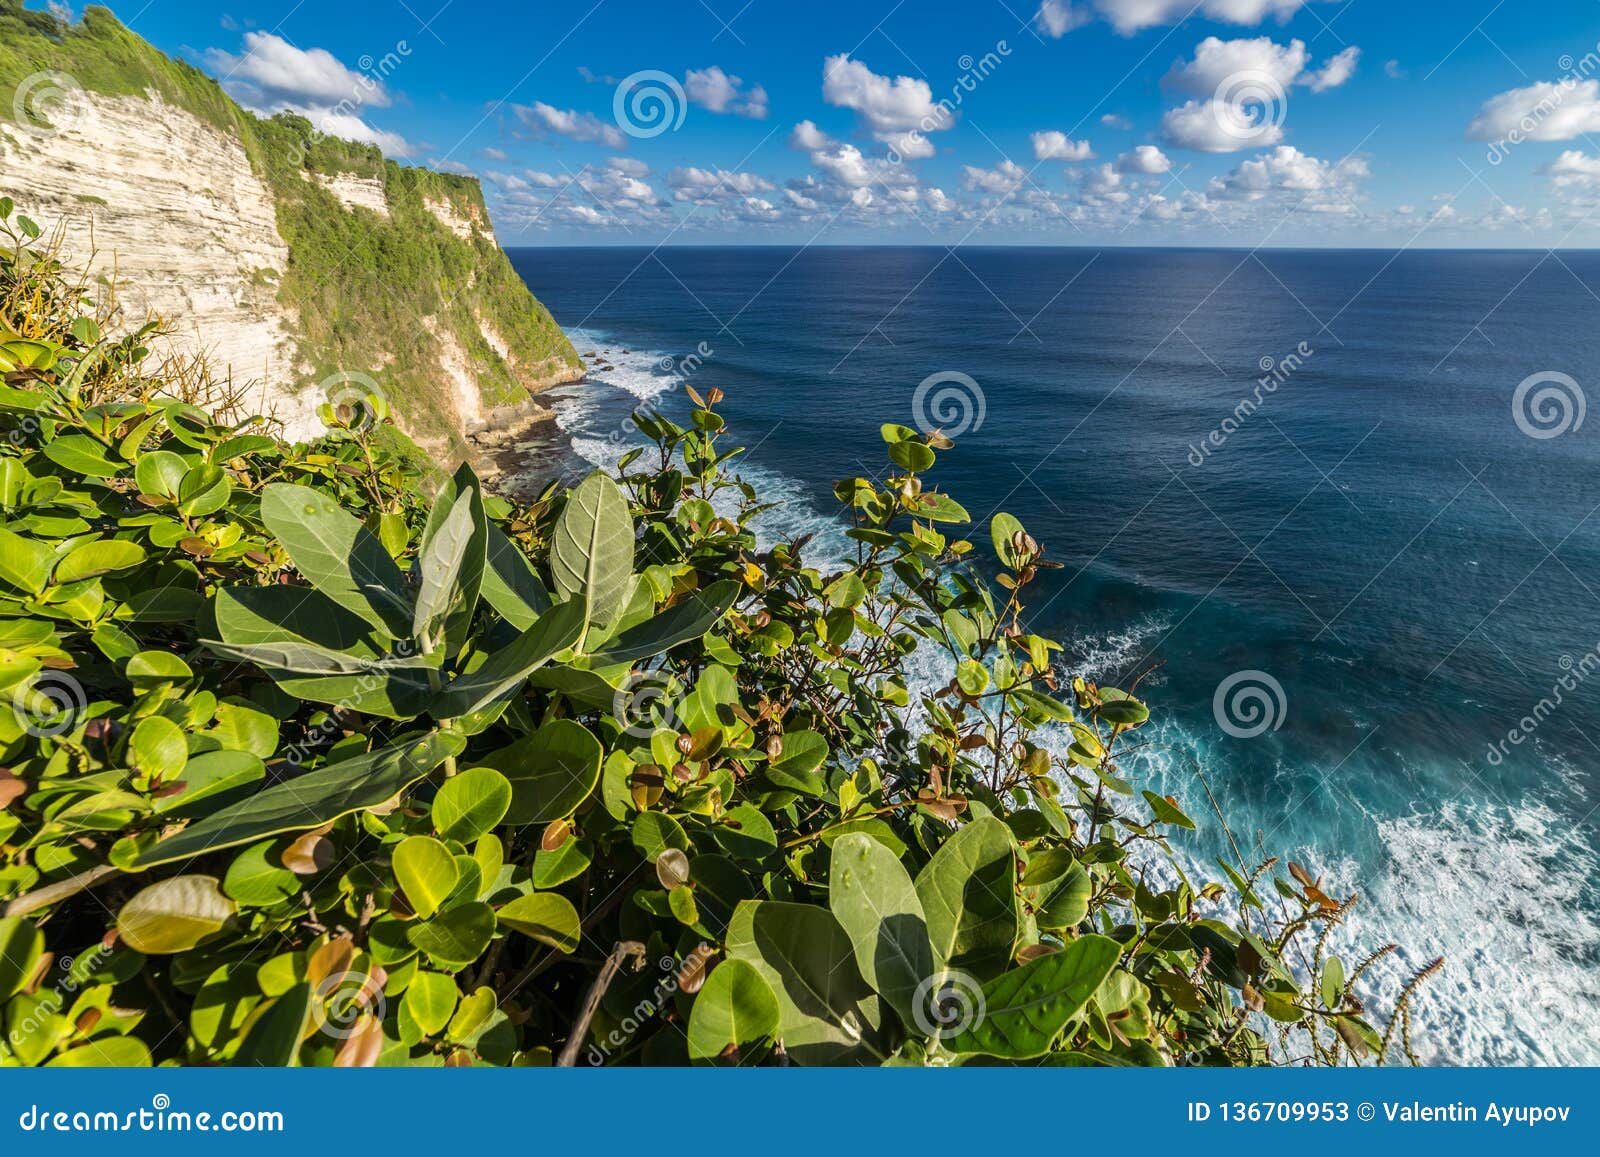 View Of Uluwatu Cliff With Coast And Blue Ocean  In Bali  